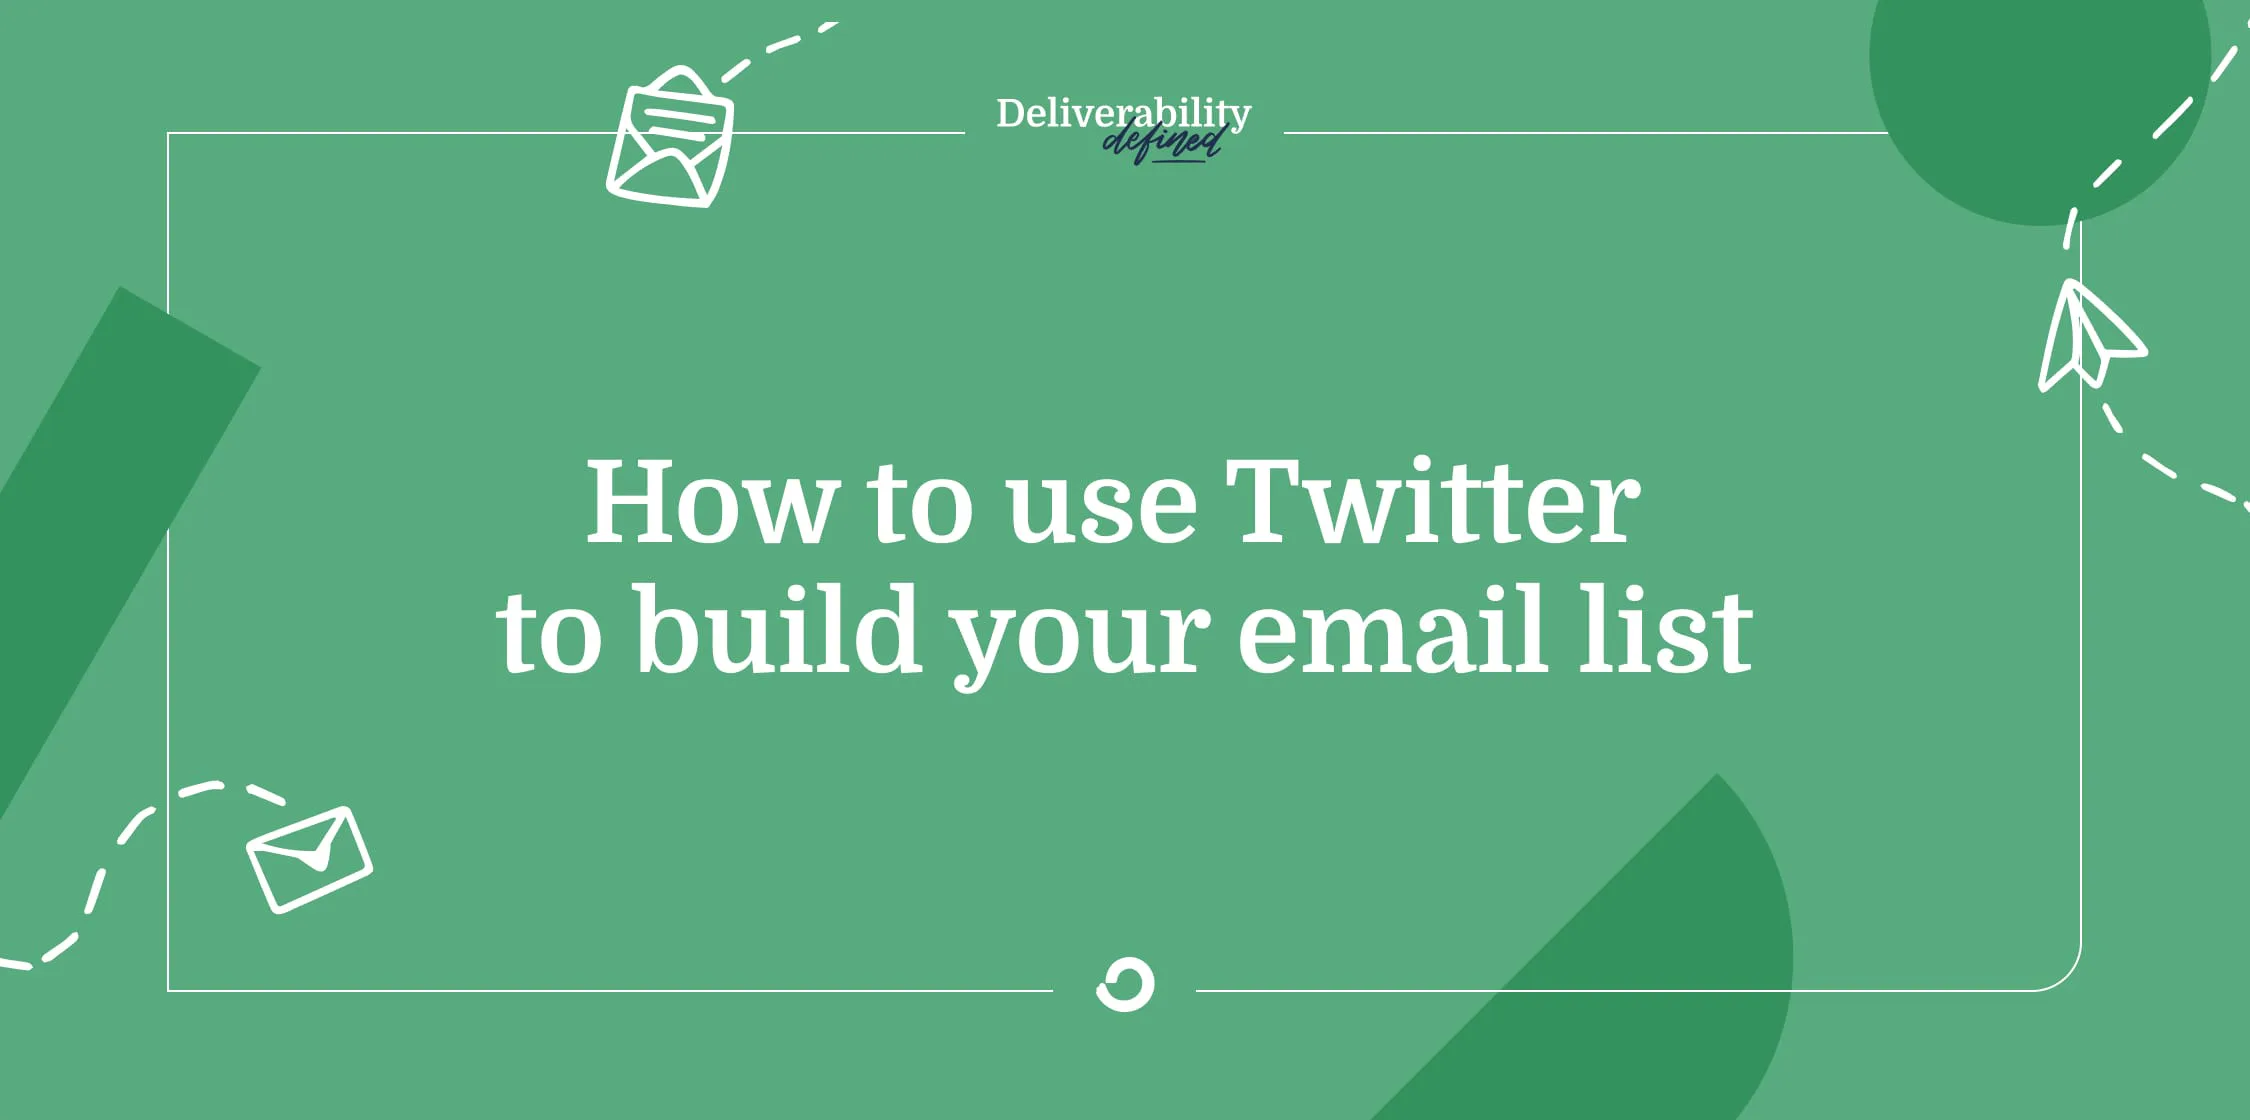 How to use Twitter to build your email list